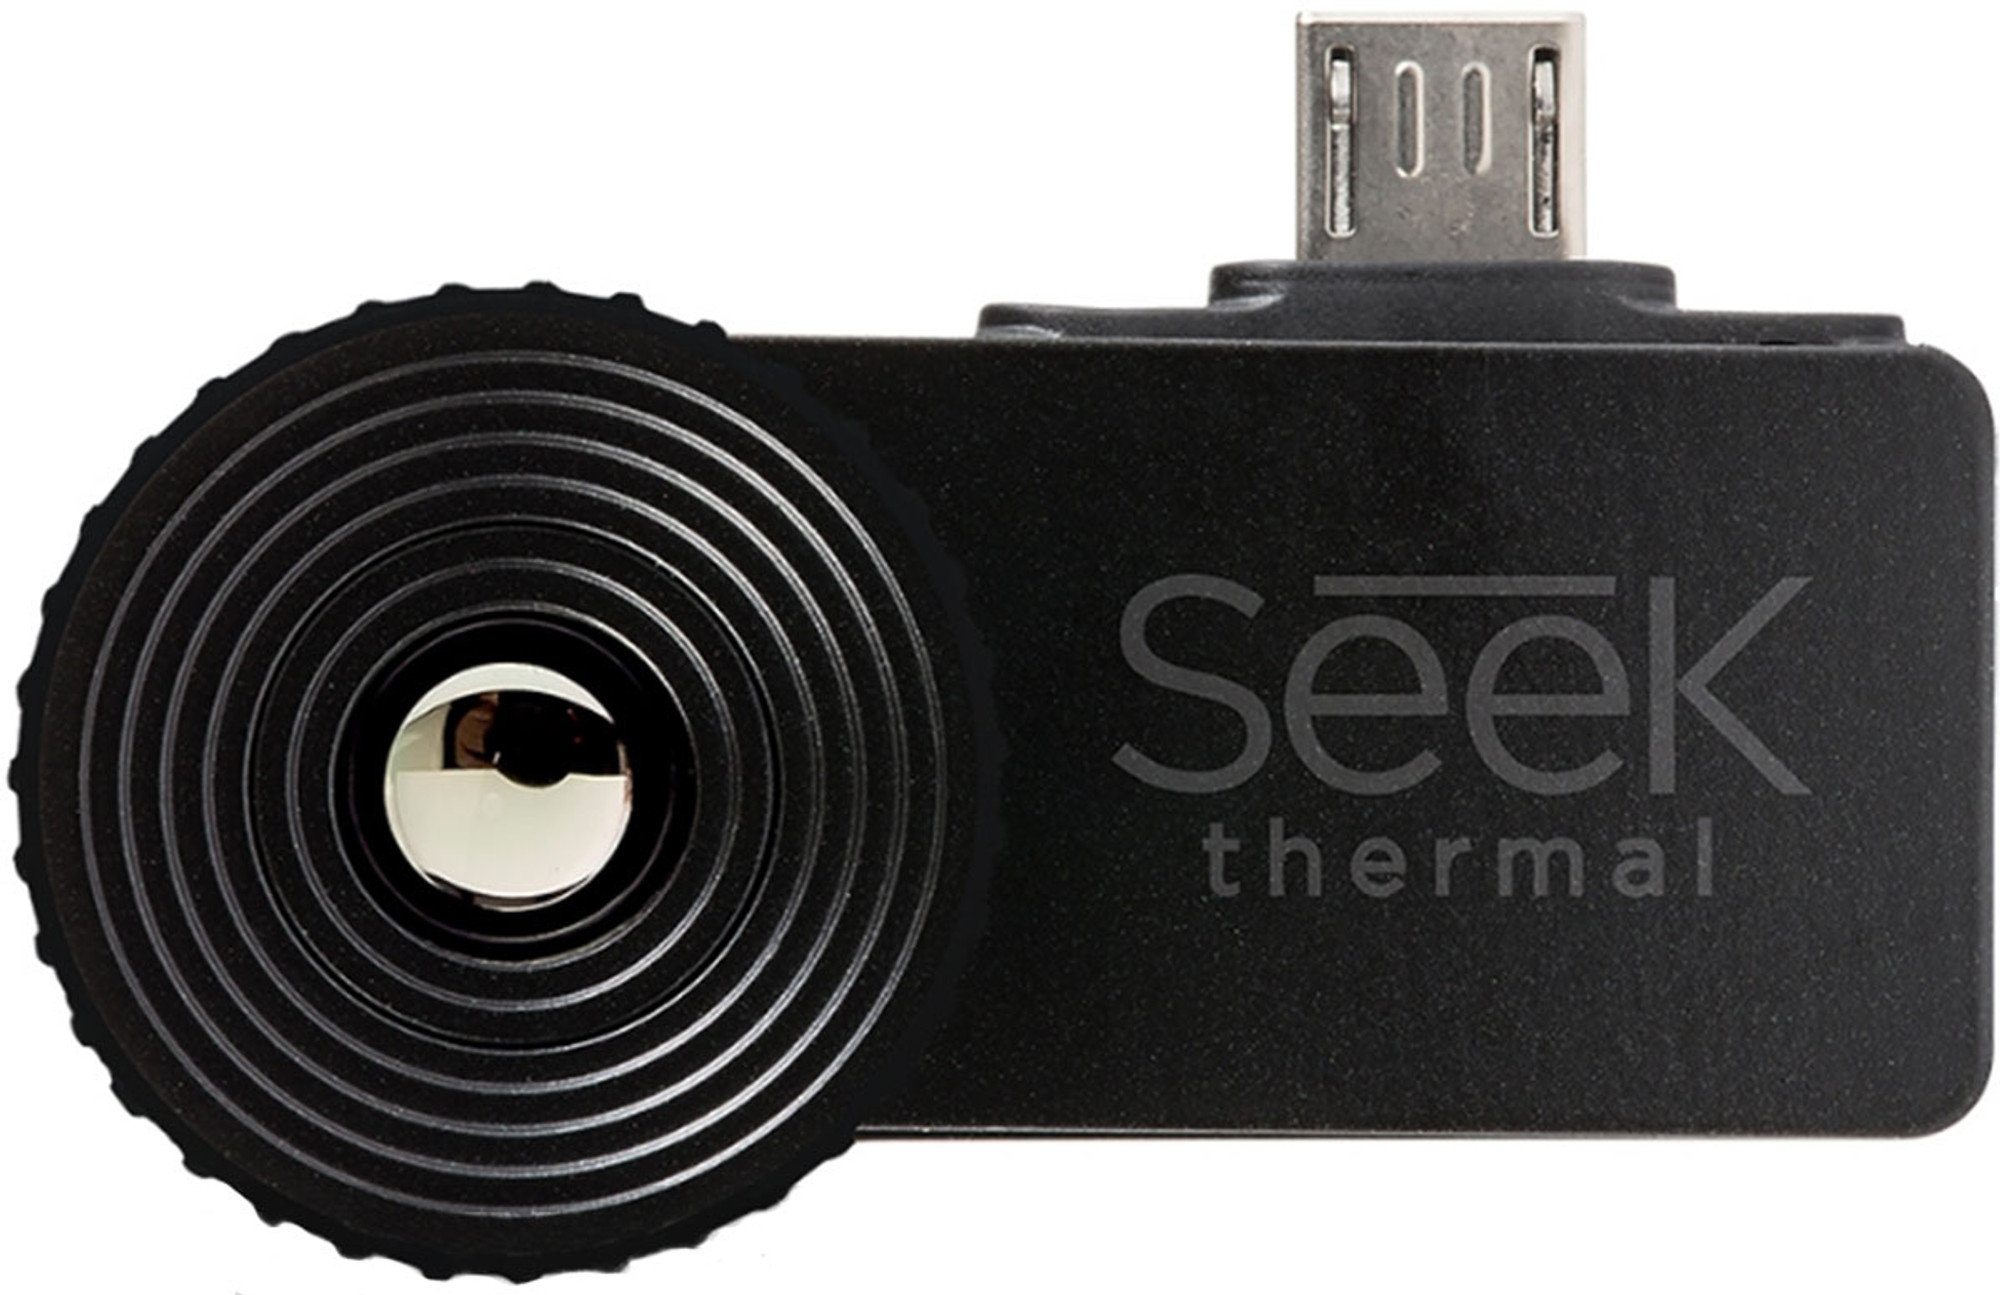 Seek Thermal SEEK XR Compact Thermal Imaging Camera for Android Mobile Devices